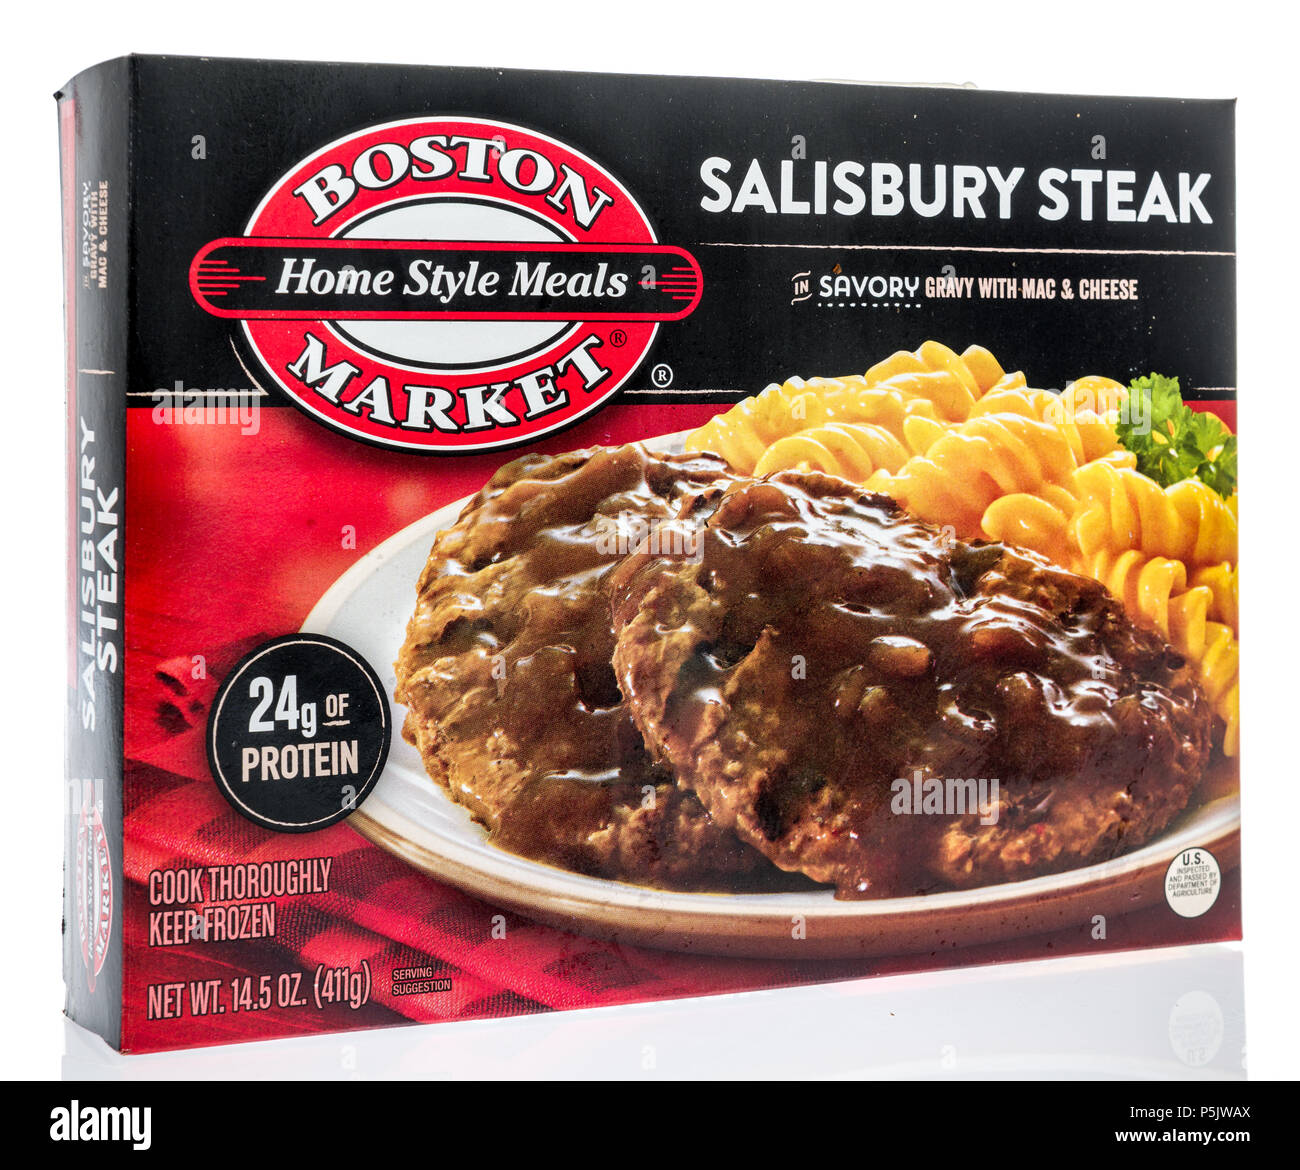 Winneconne, WI - 17 June 2018: A box of Boston Market homestyle meals in Salisbury steak on an isolated background. Stock Photo